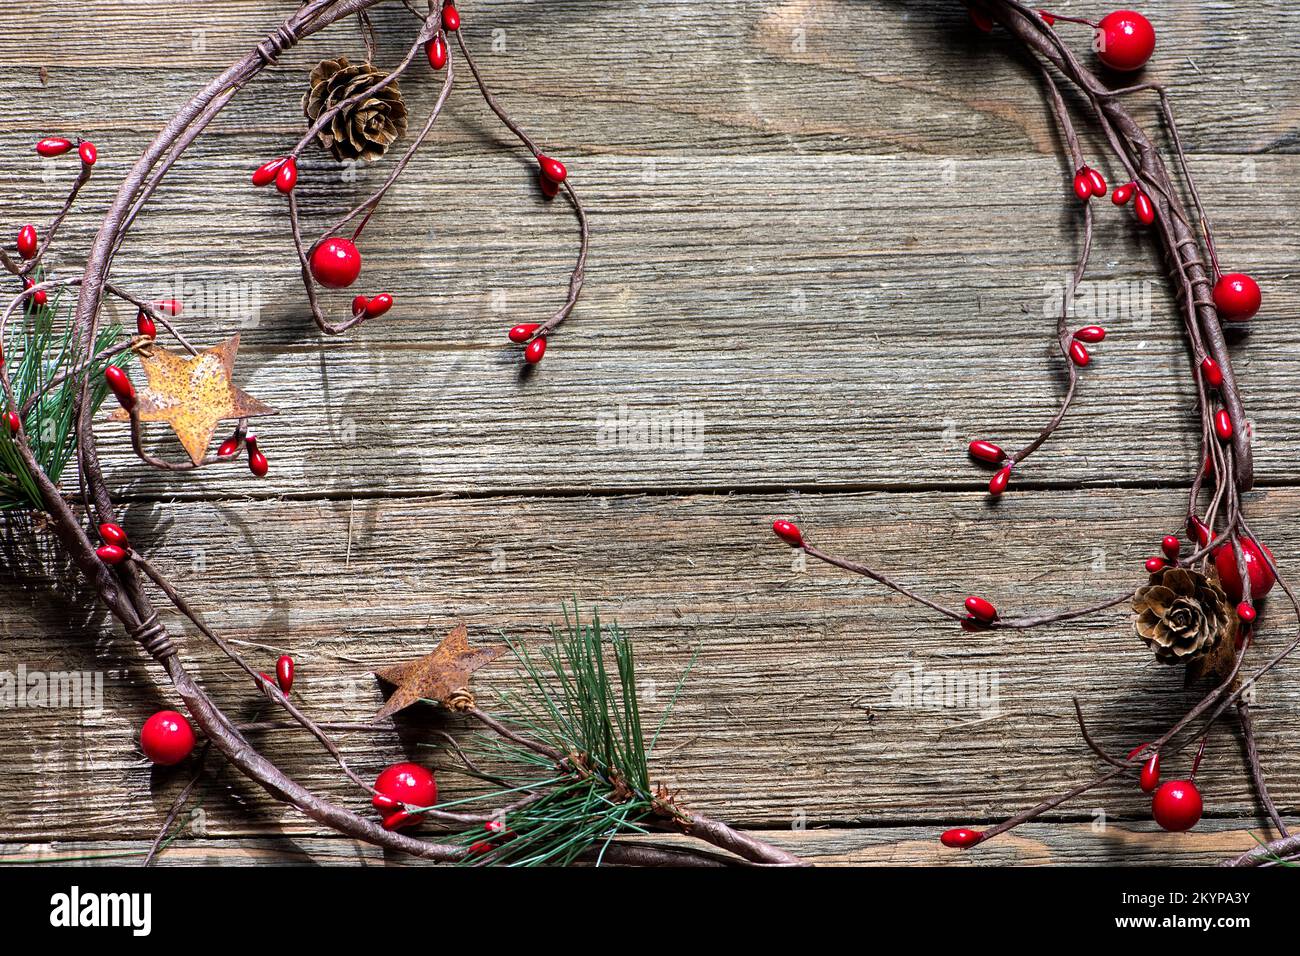 Grape vine traditional Christmas decorations, farmhouse style, on a wooden background, no text Stock Photo